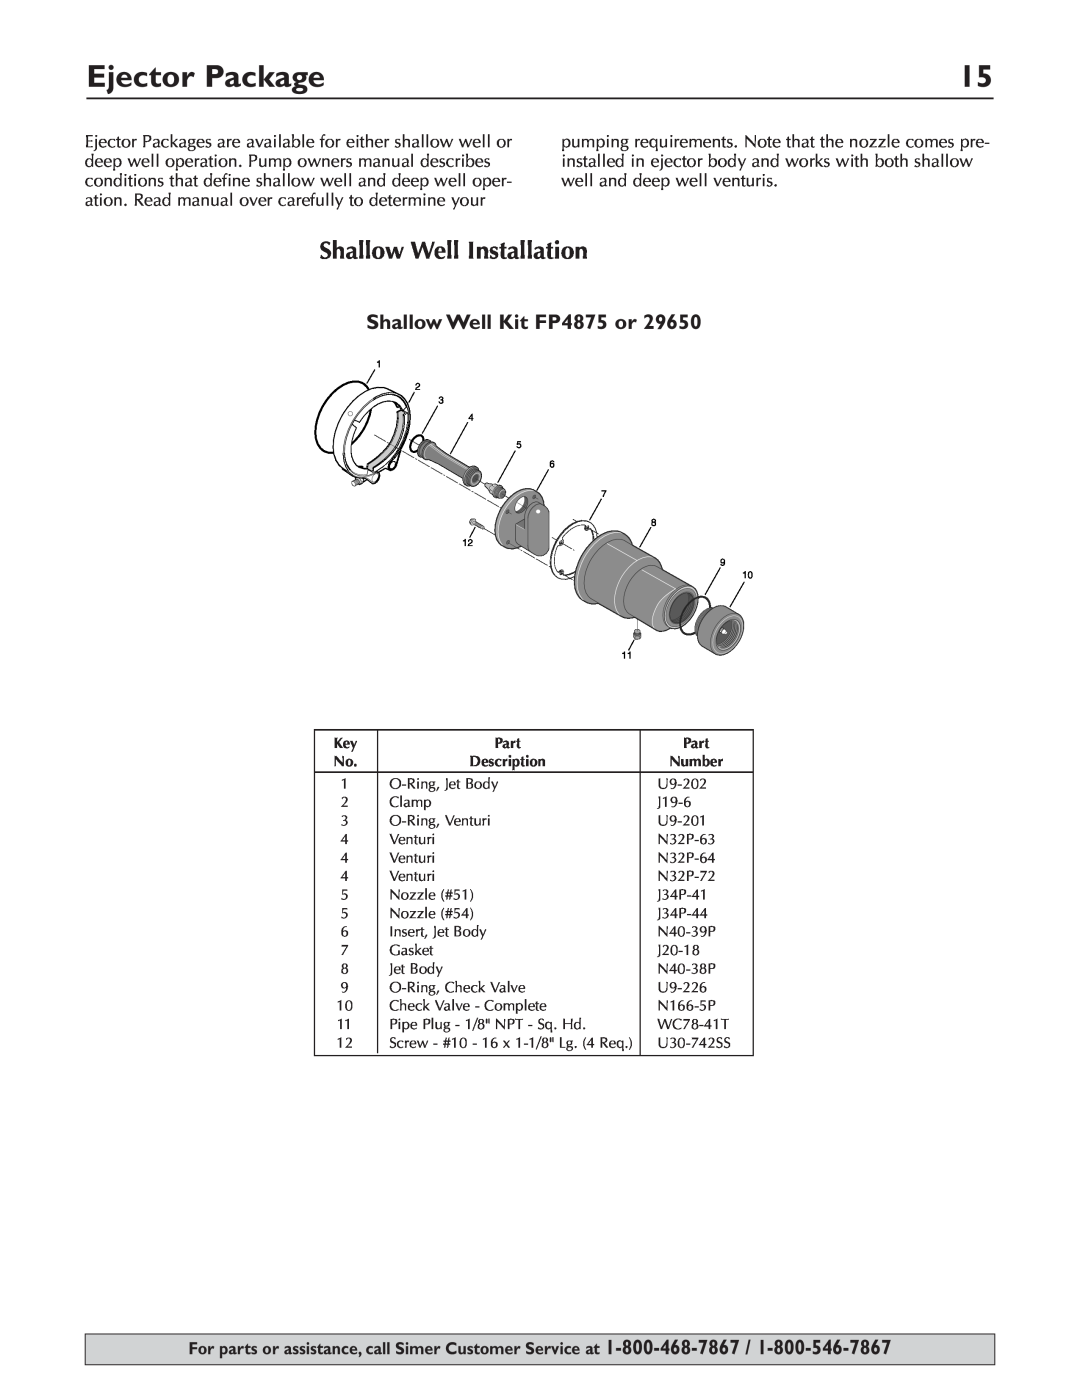 Simer Pumps 3310P, 3307P, 3305P owner manual Ejector Package, Shallow Well Installation, Shallow Well Kit FP4875 or 